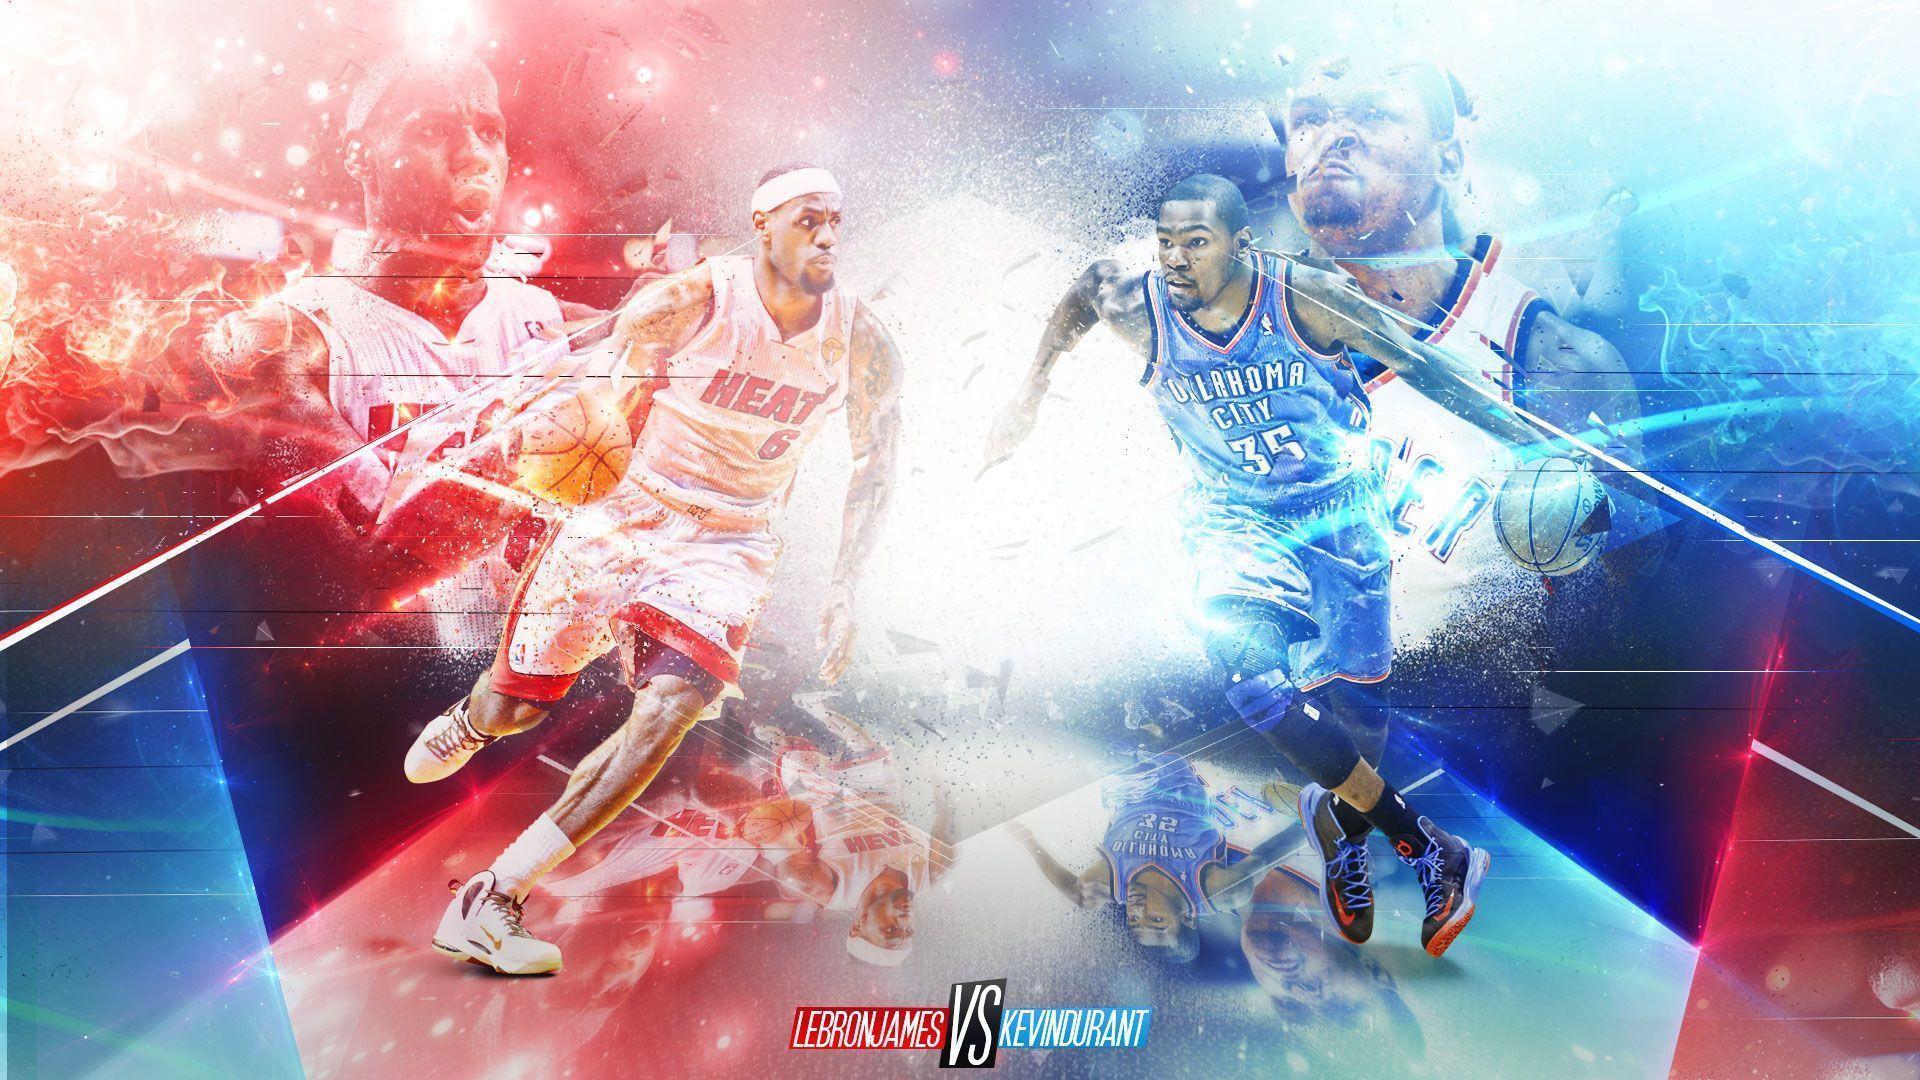 Lebron vs KD videos, image and buzz